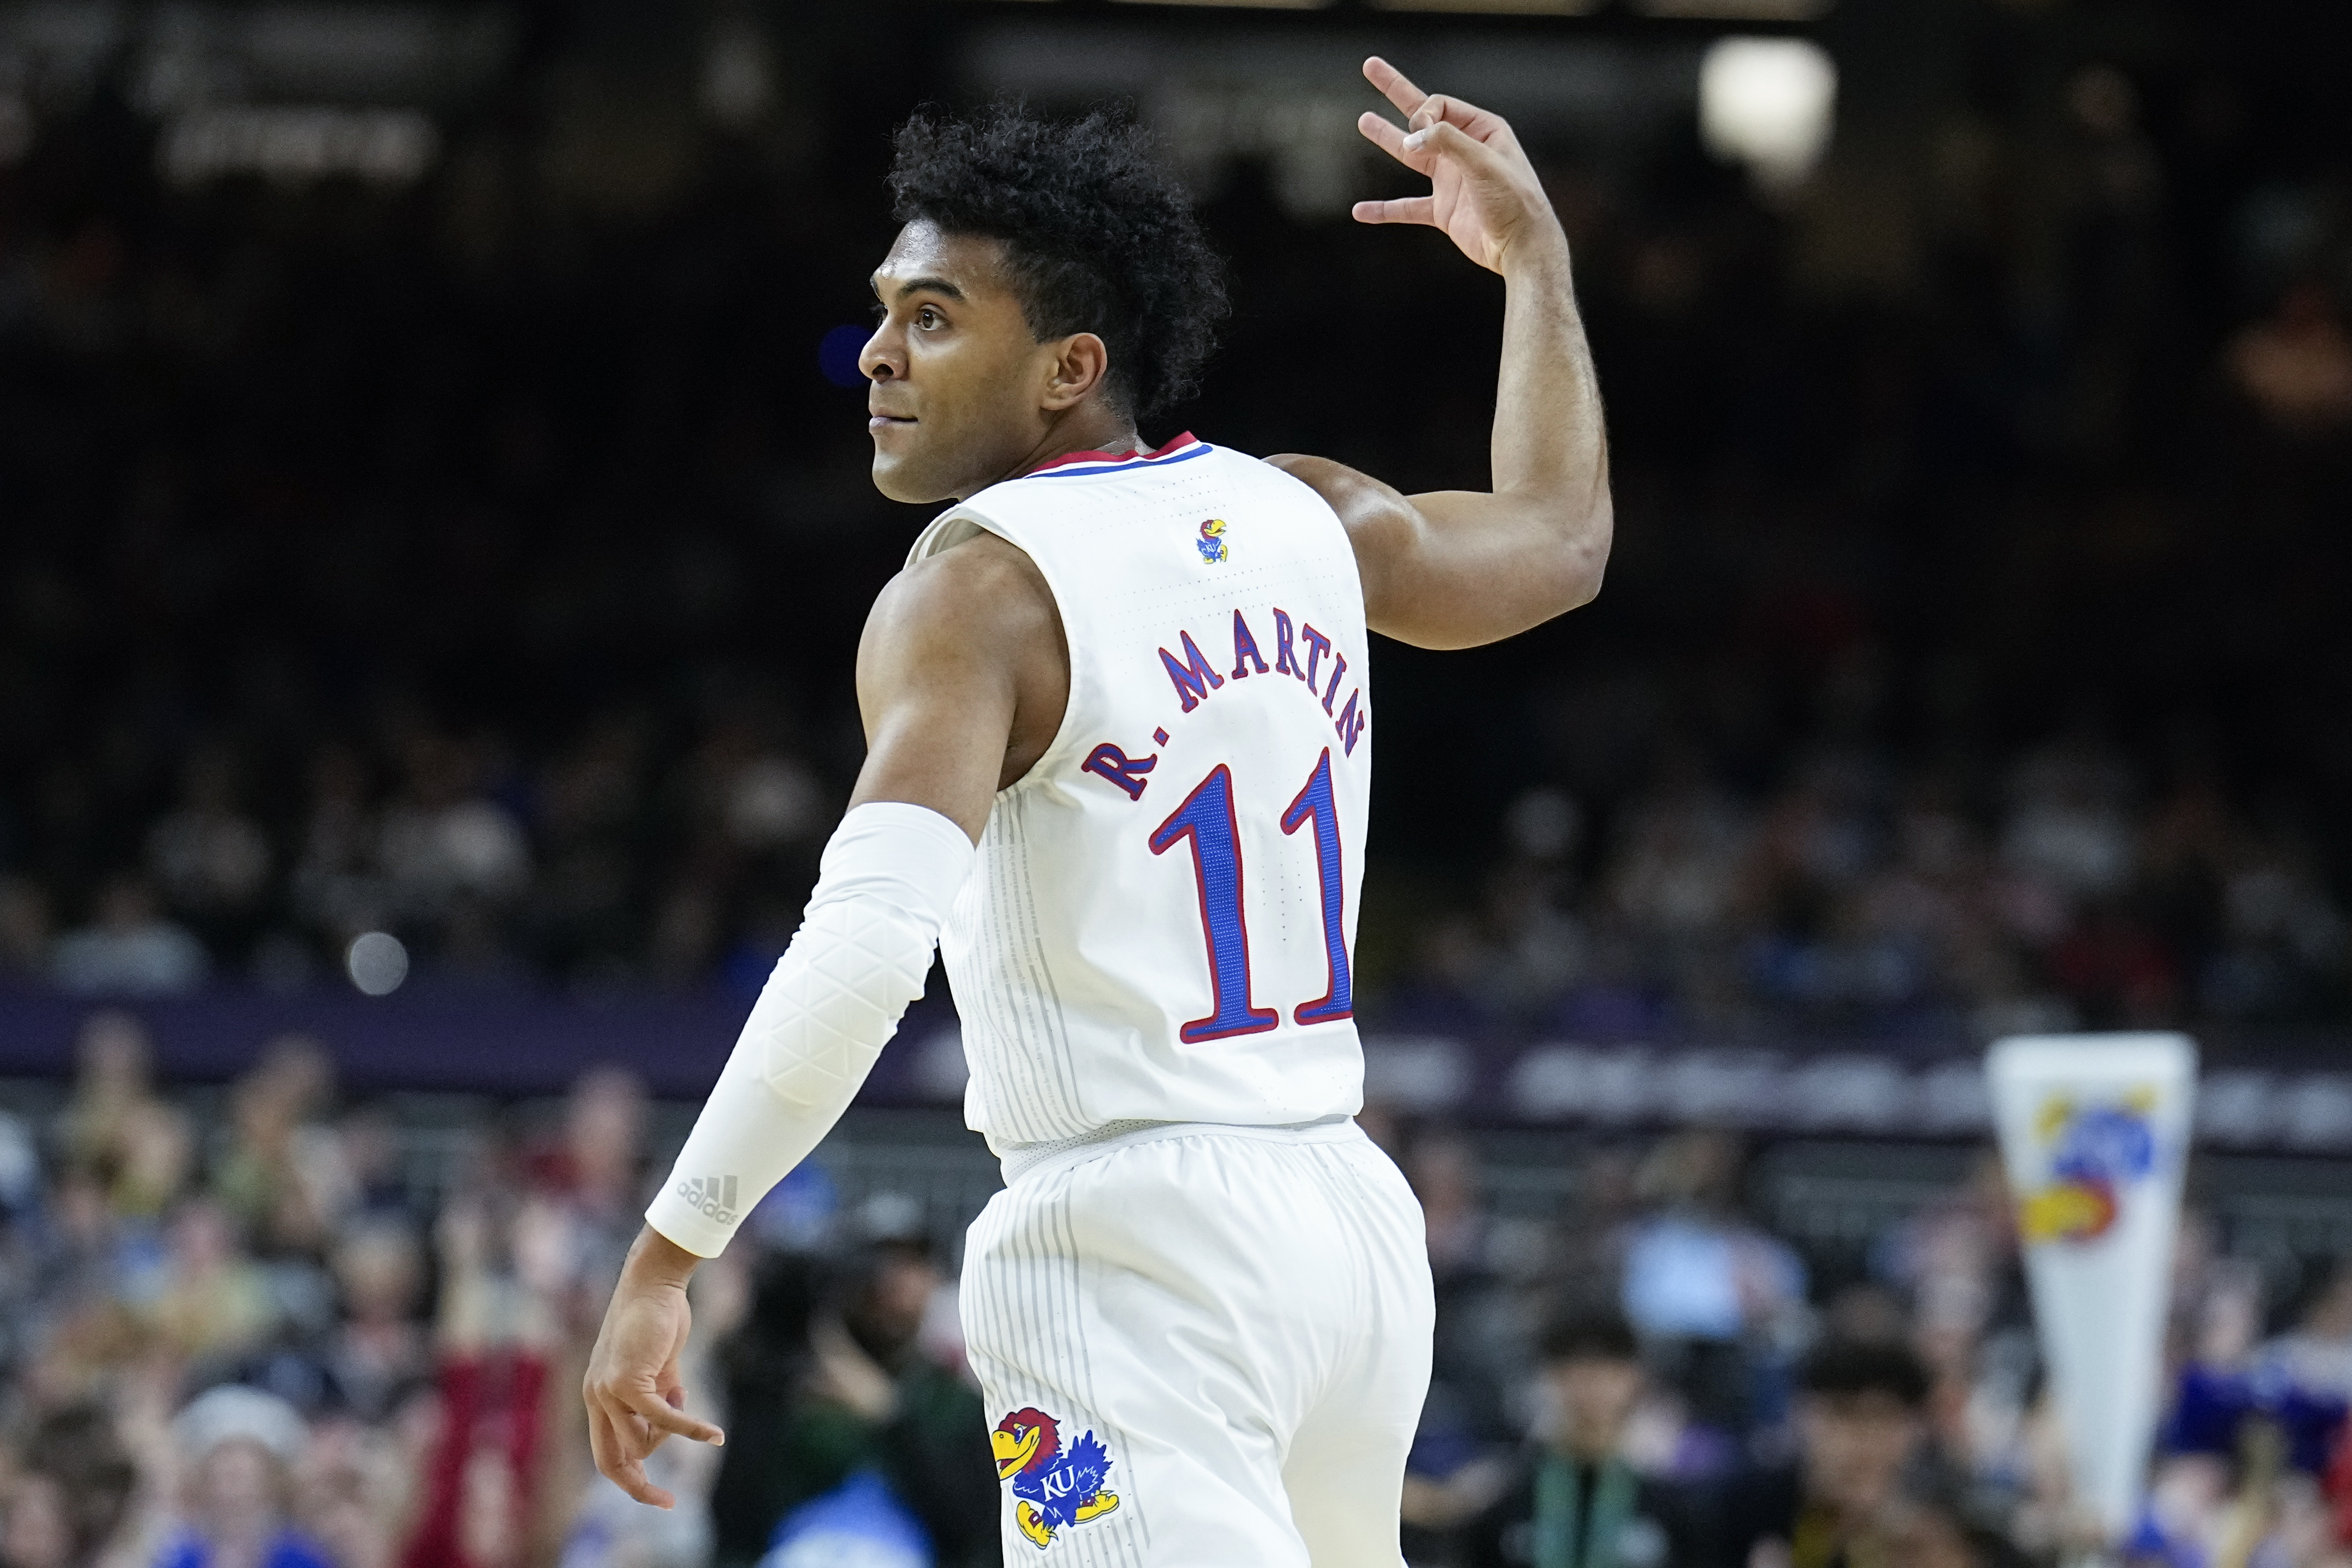 Kansas expects Embiid to play in NCAA tournament